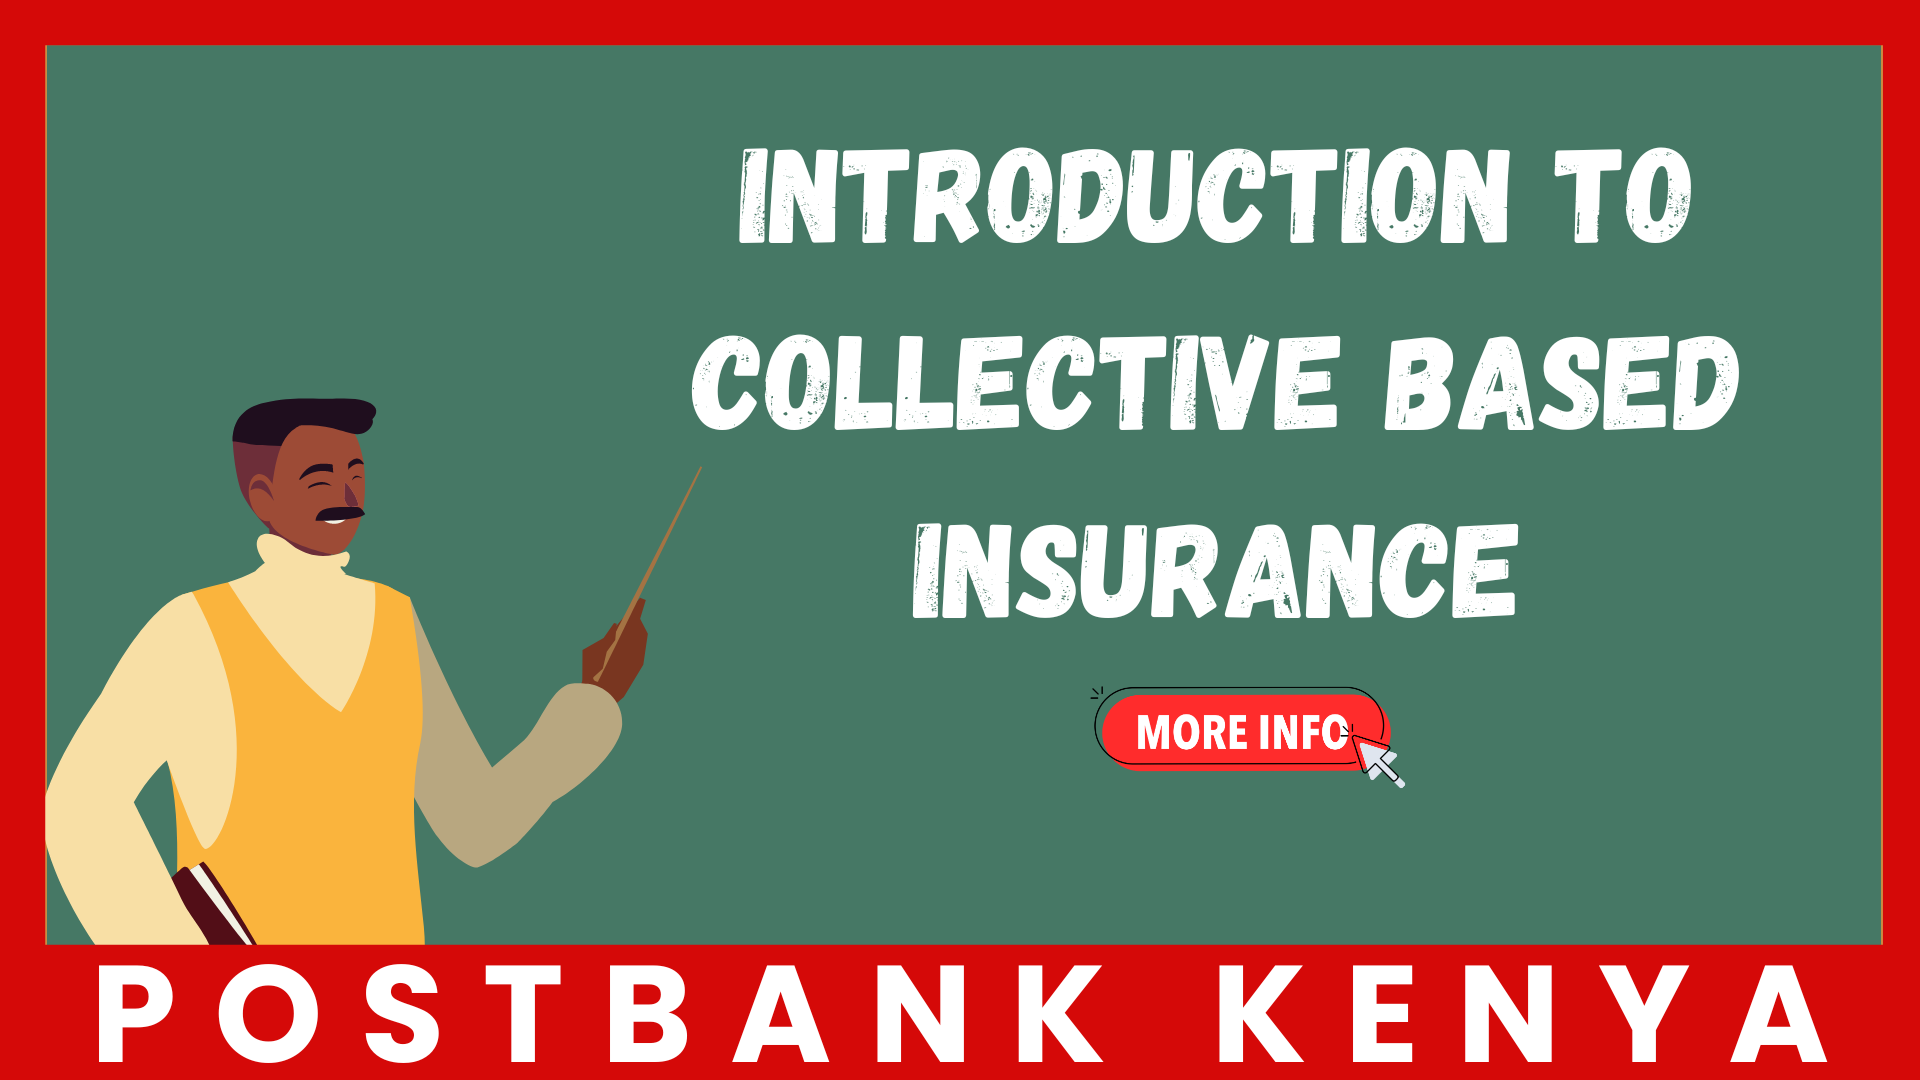 Introduction to Collective-Based Insurance (CBI) with Certification